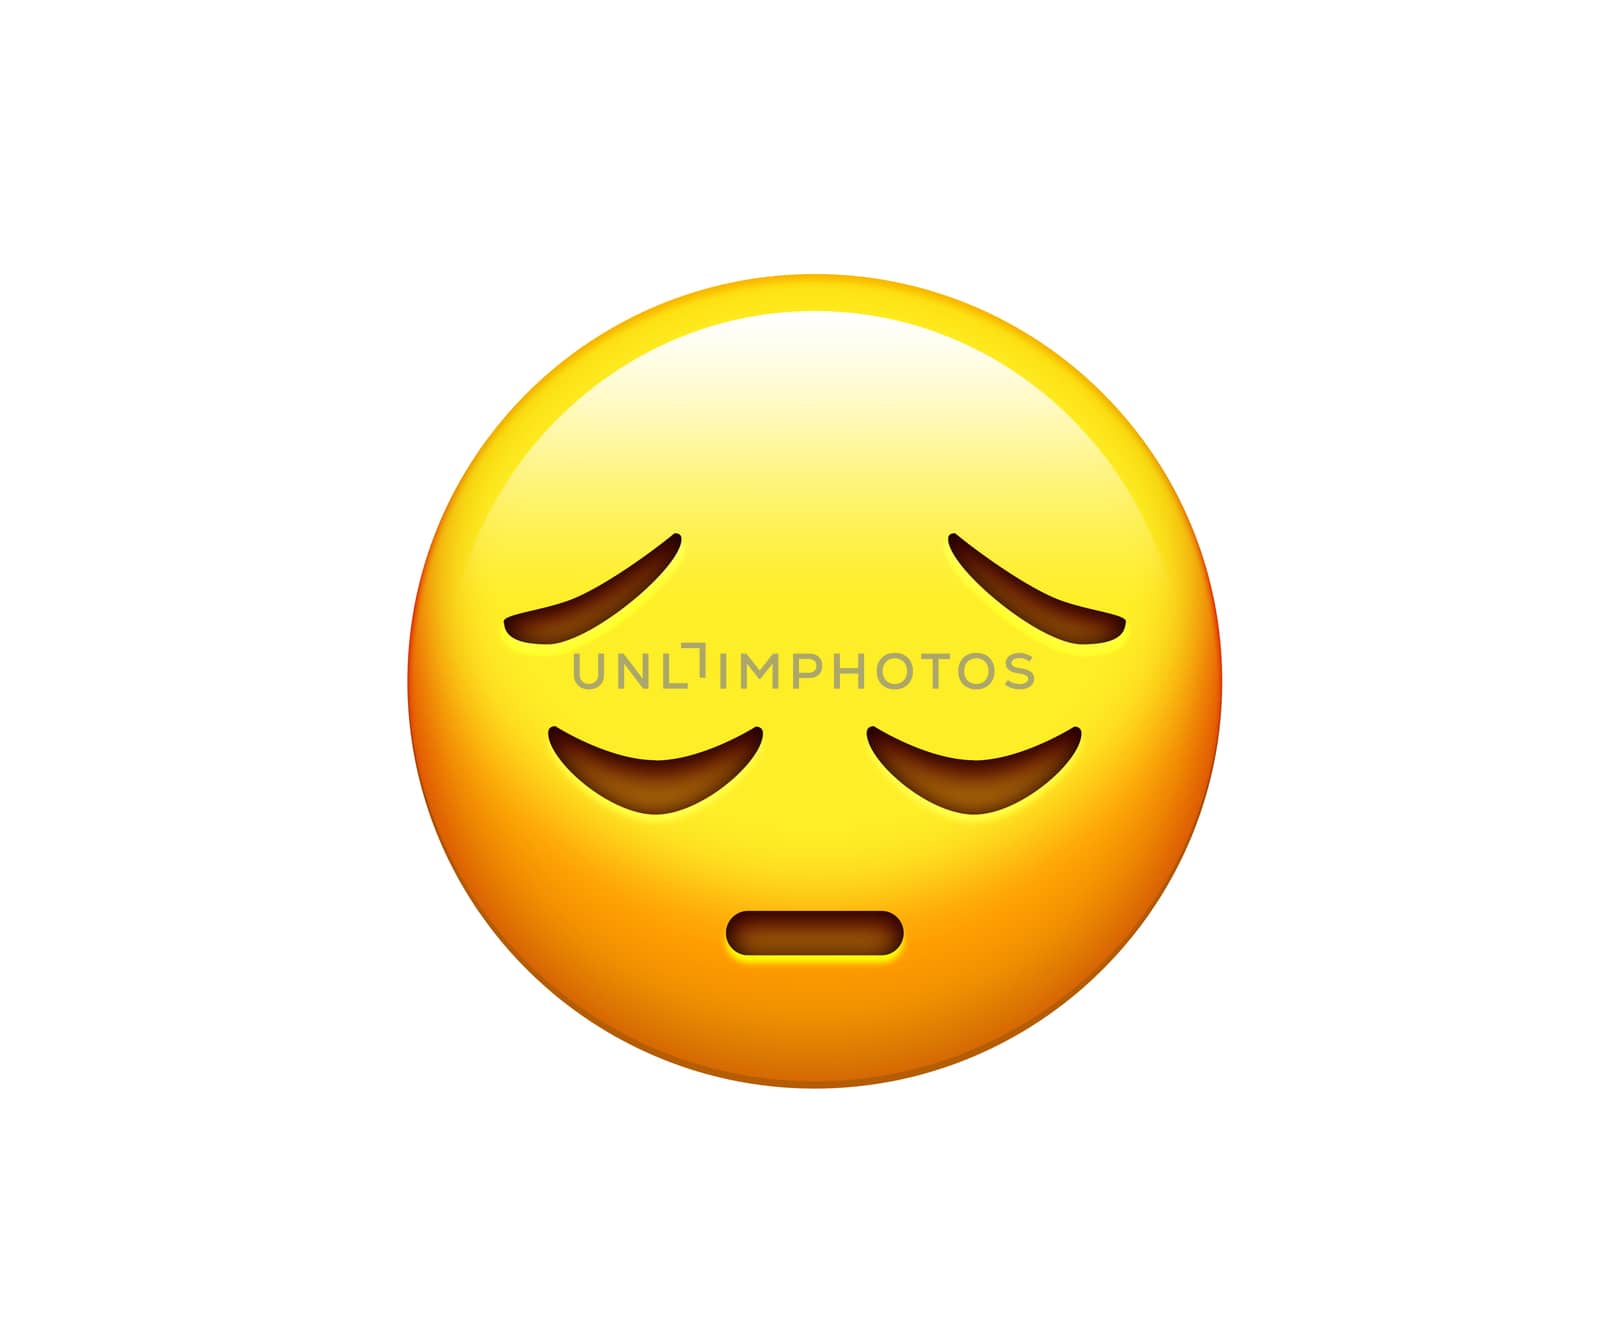 Emoji yellow disappointed, upset face and closing eyes icon by cougarsan